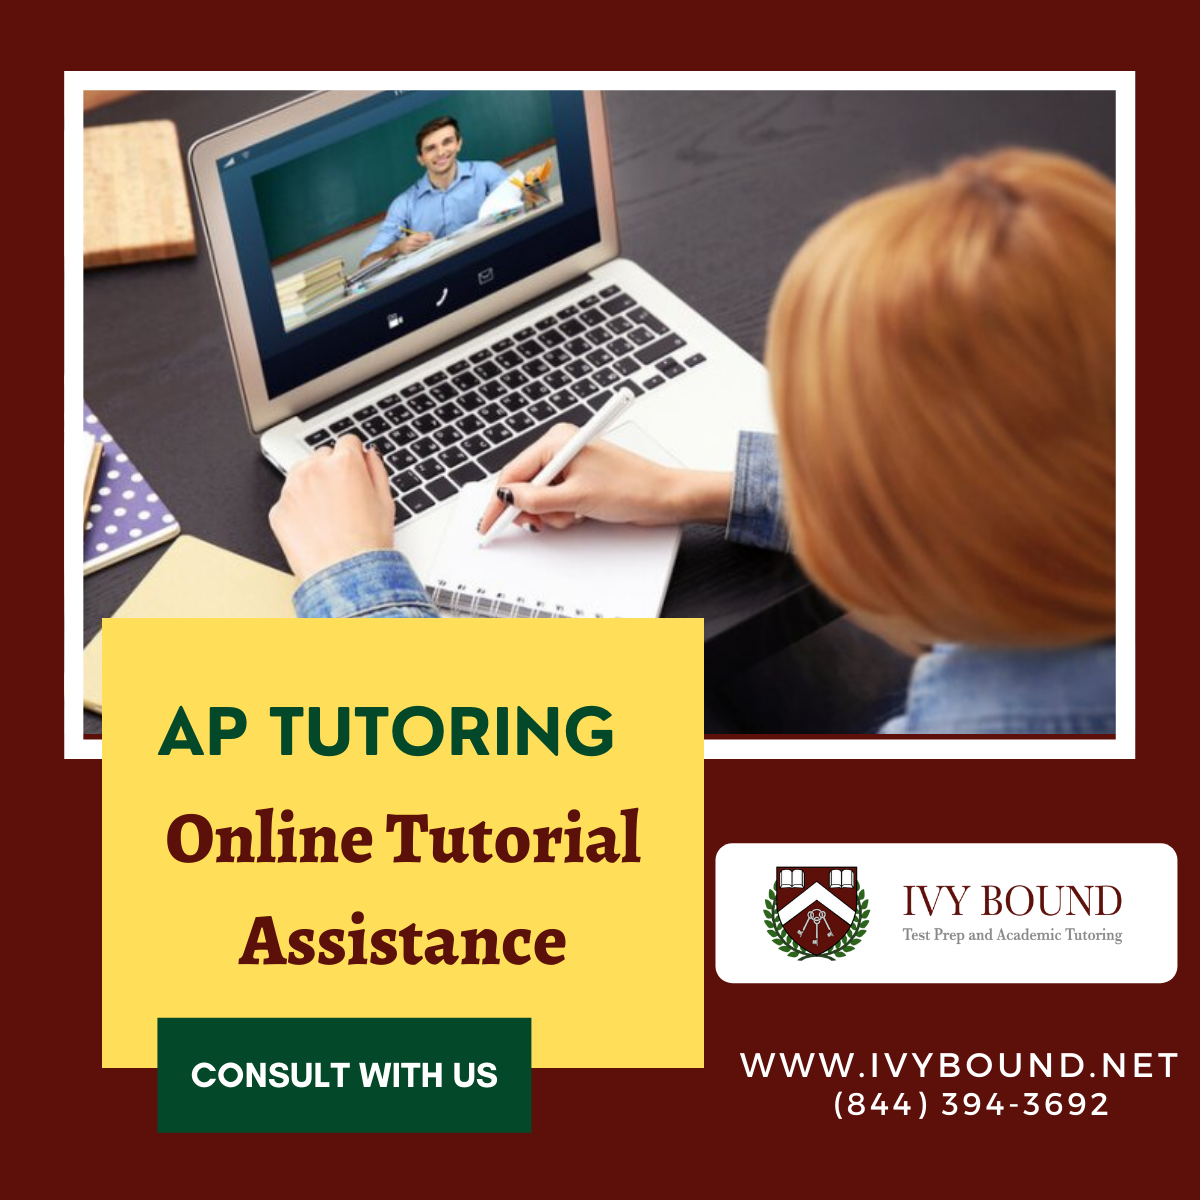 Ivy Bound Test Prep on Gab: 'Explore the Right Place to Begin Training for AP …'